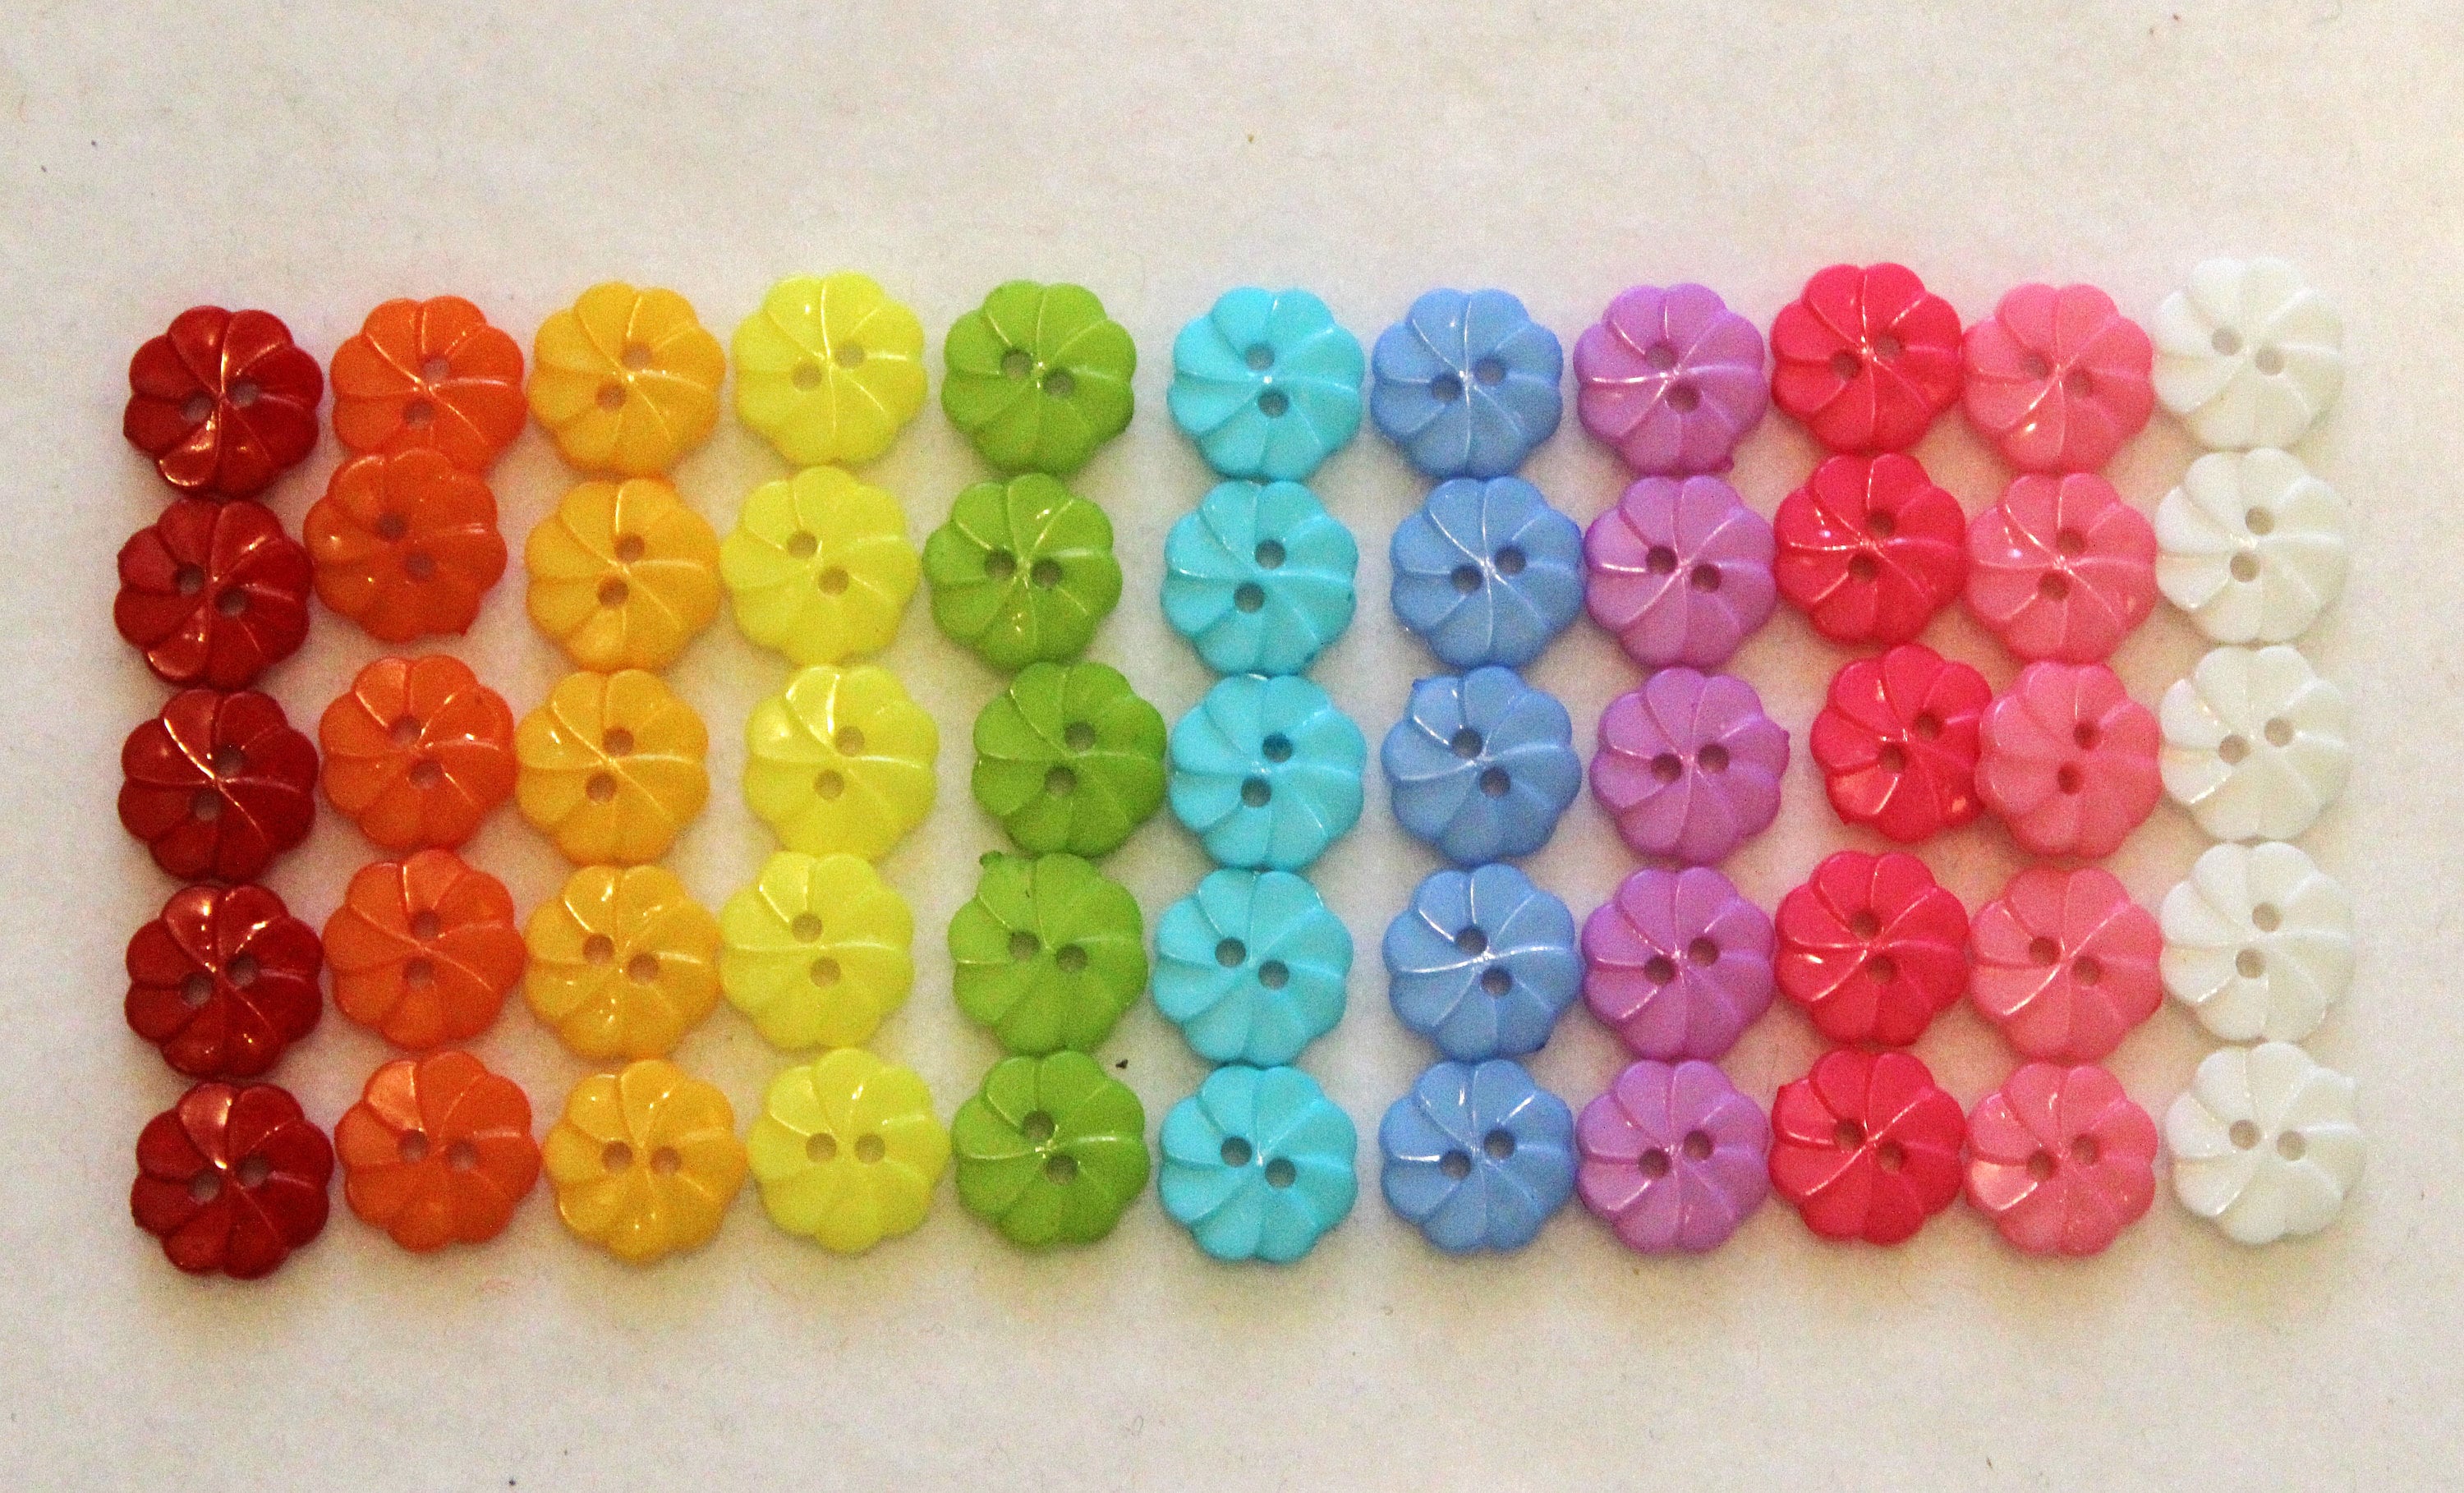 Set of 70 Small Buttons, 9 Mm Buttons, Sewing, Knitting Supplies, Tiny Doll  Buttons, 14 Colors. 